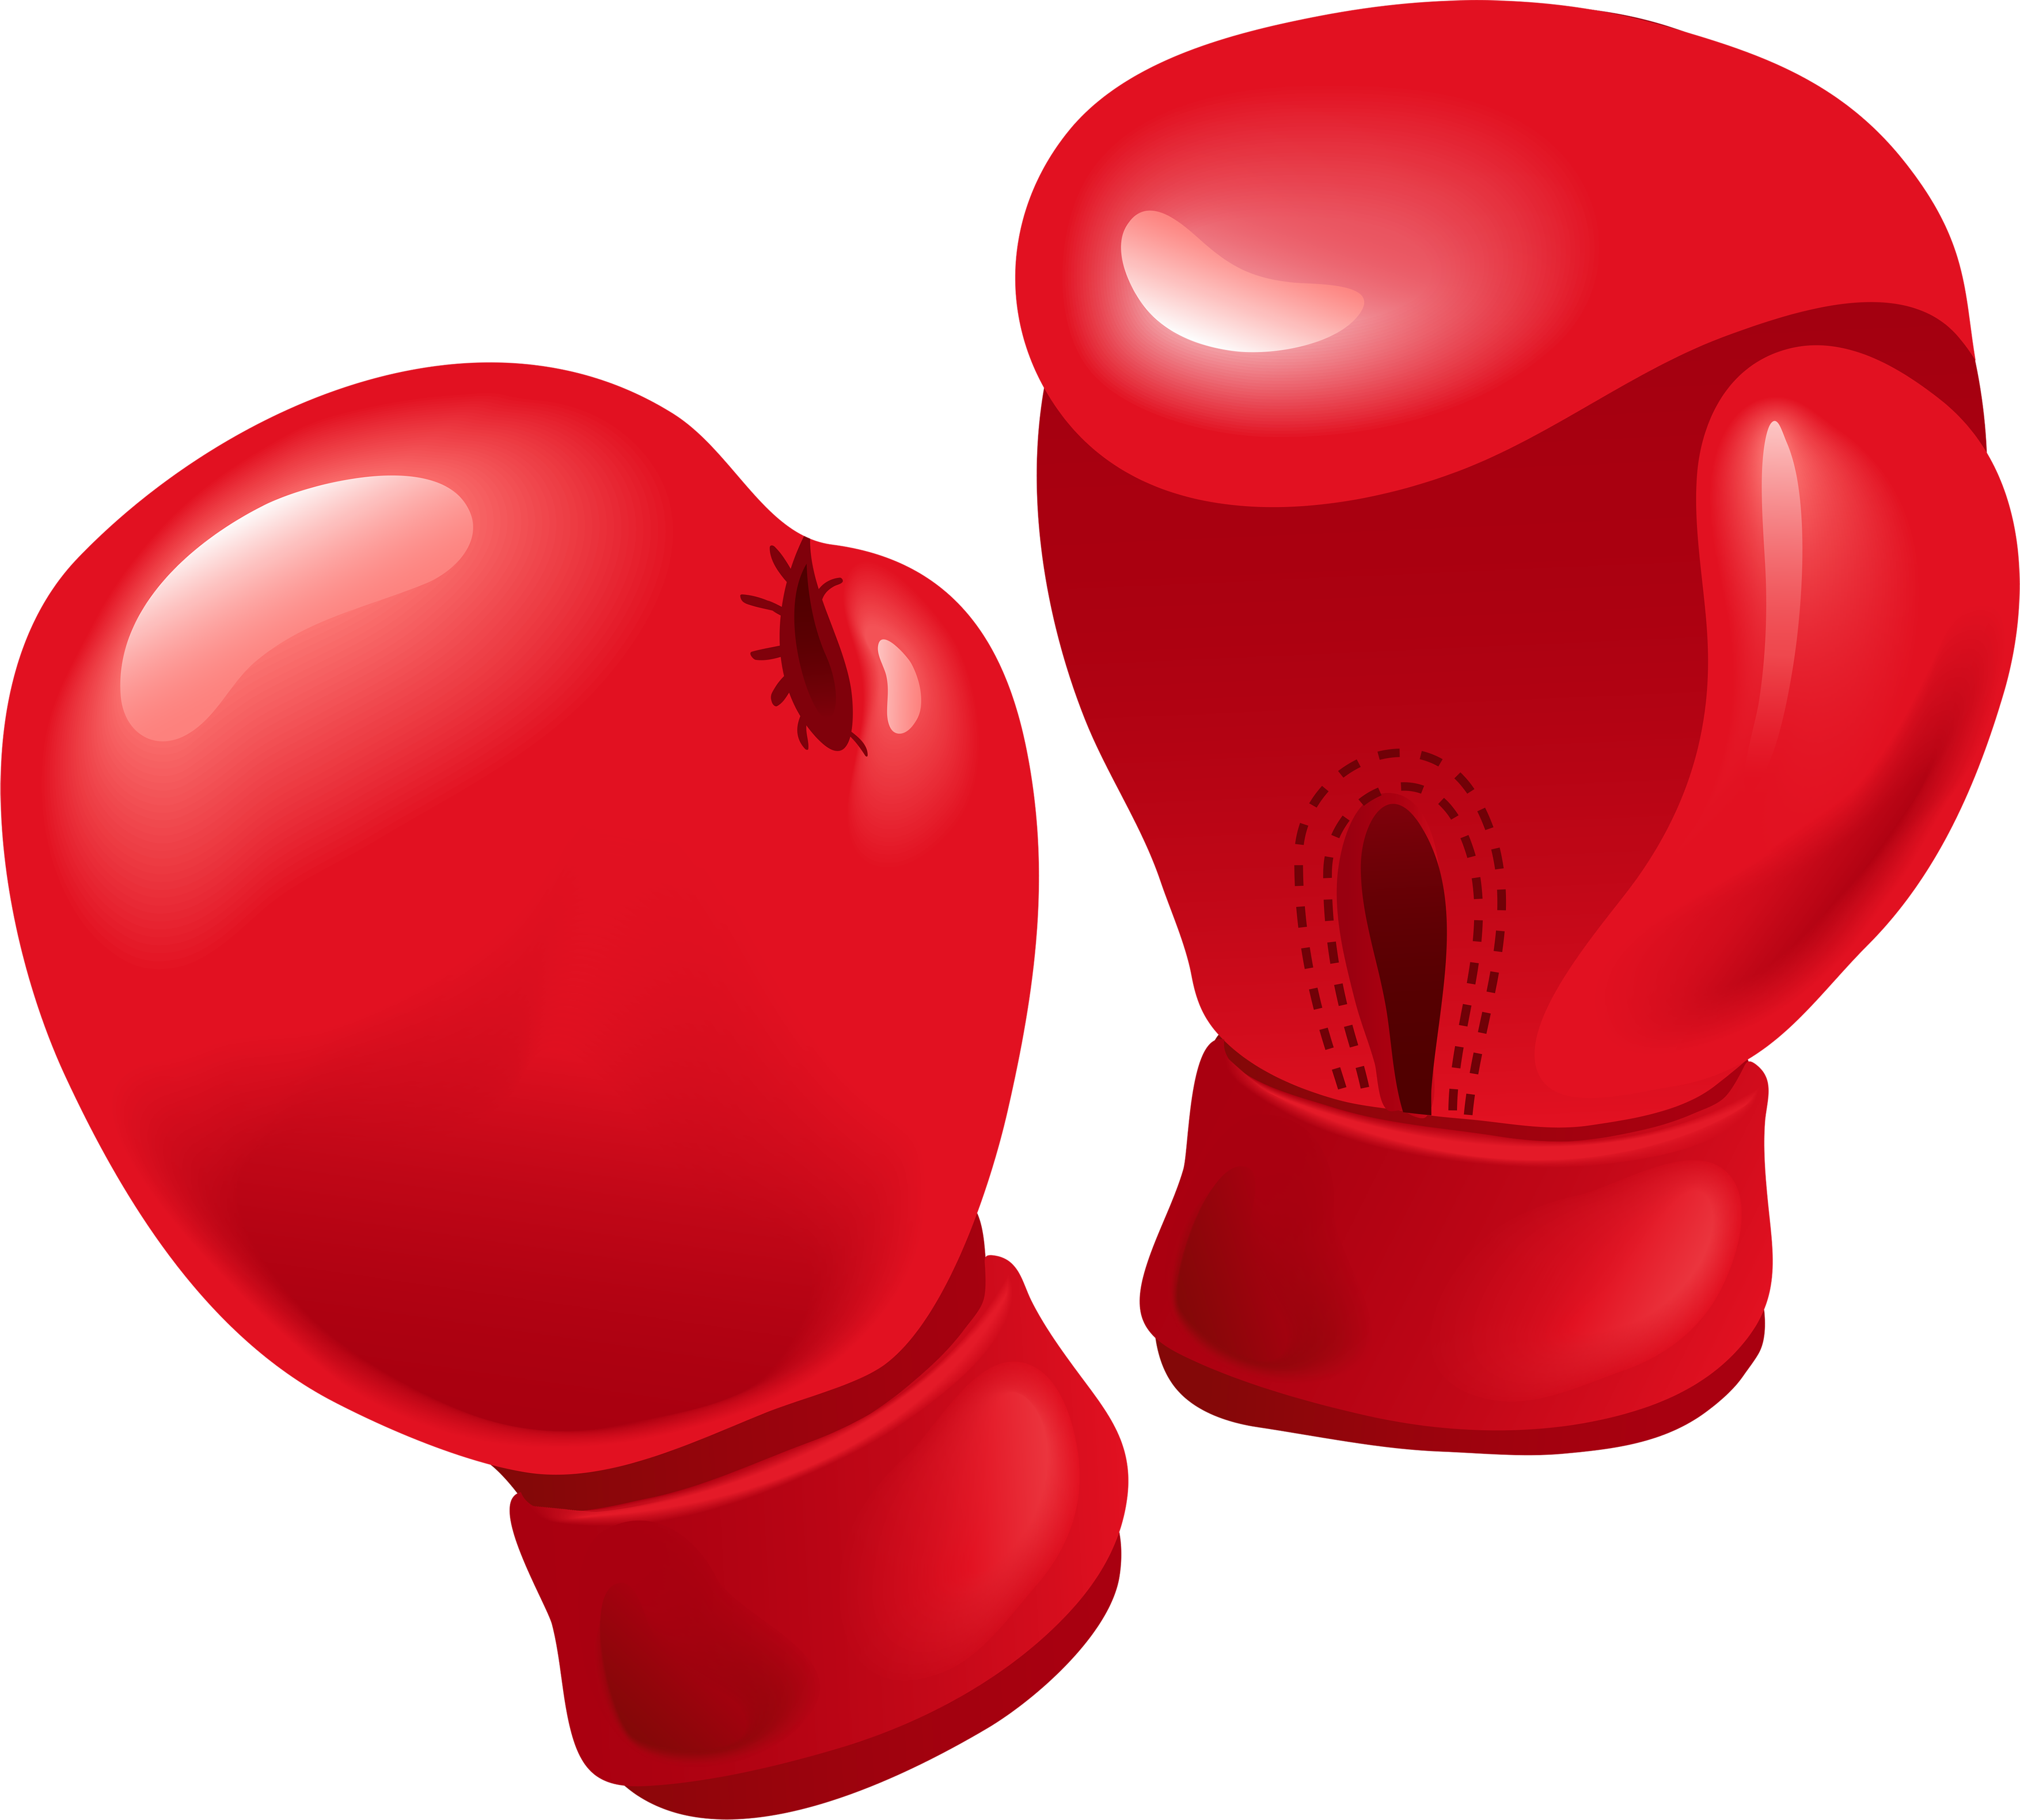 Boxing gloves ing gloves images free download clip art